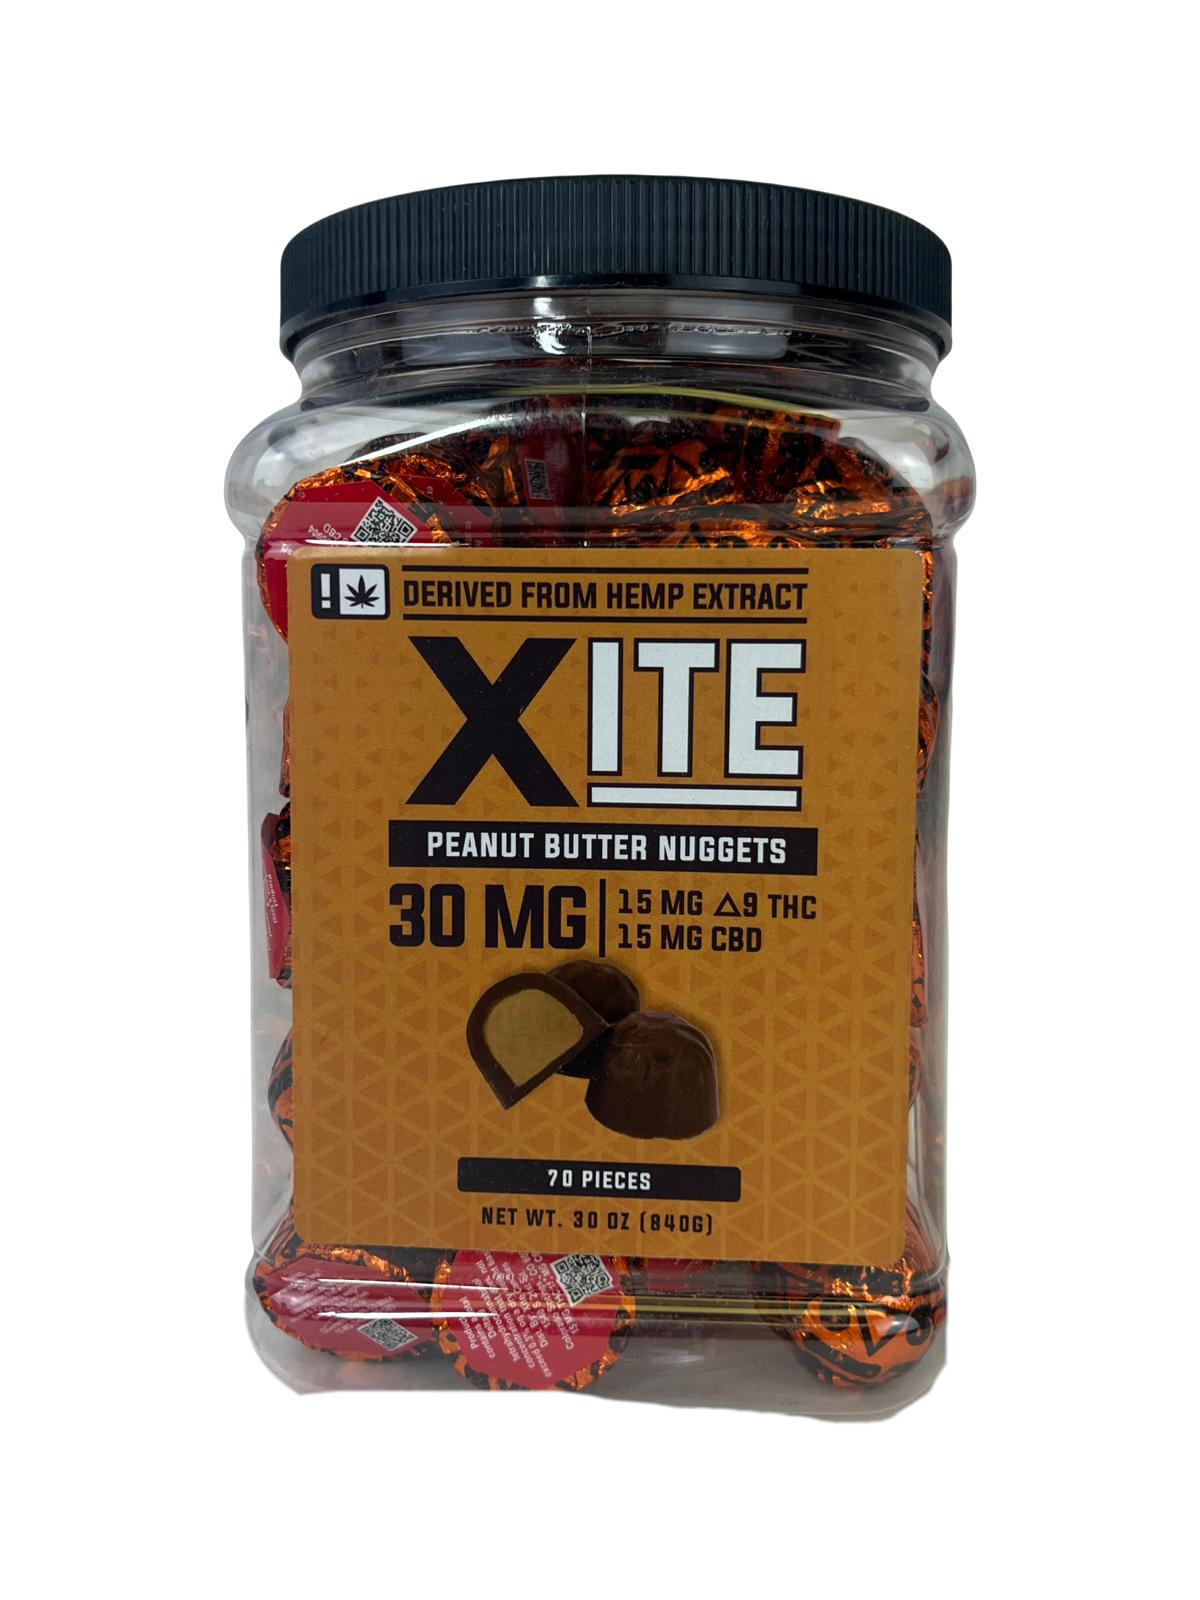 Xite Peanut Butter Nuggets 30mg - 70 Count